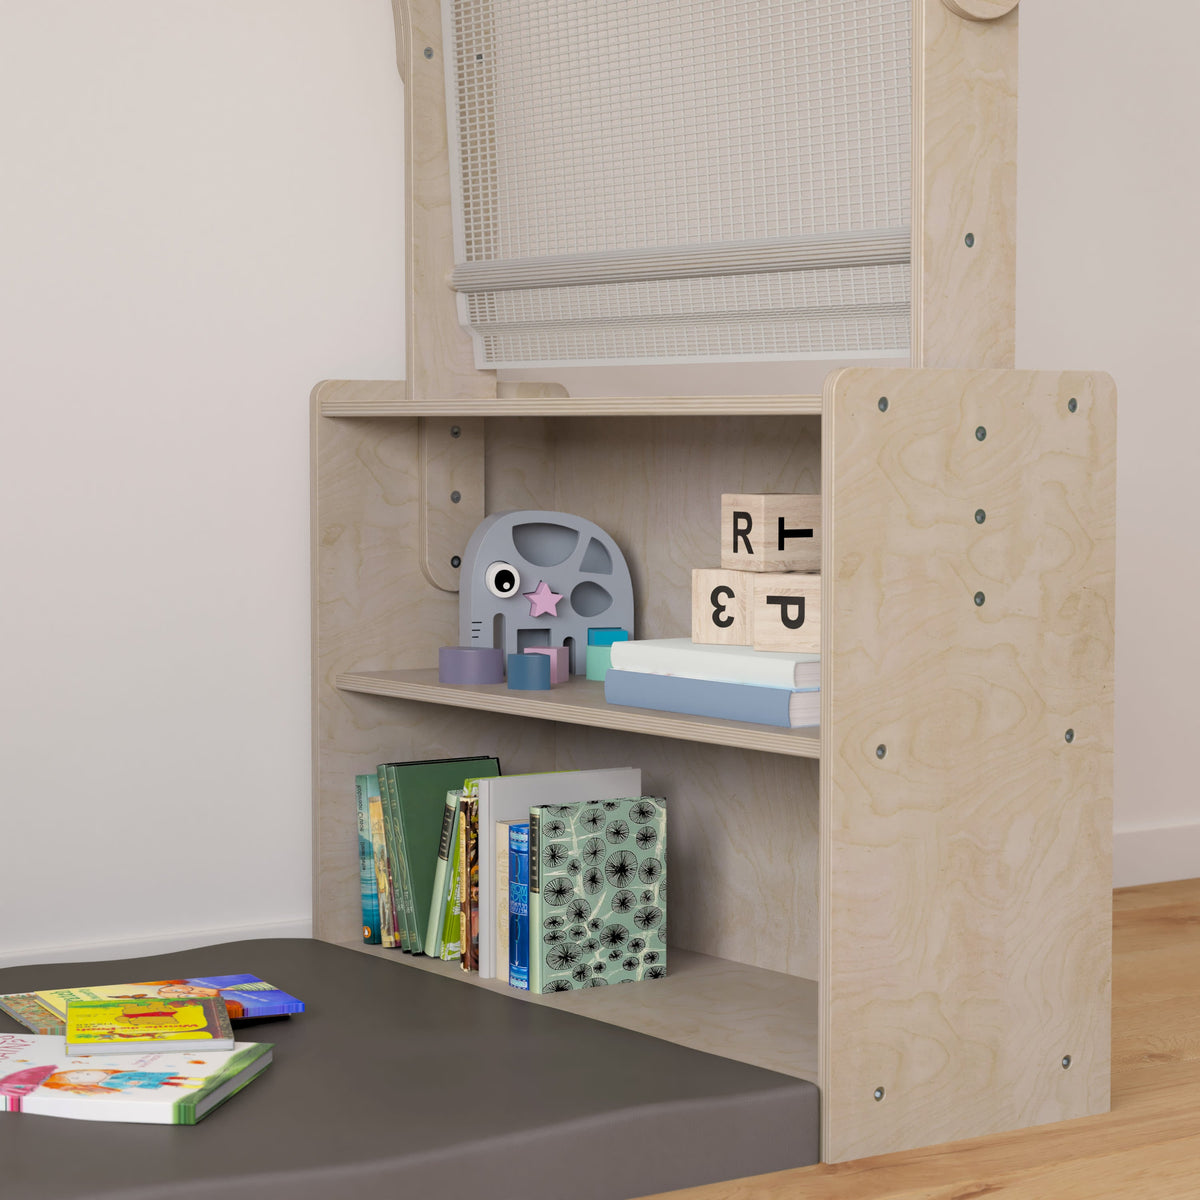 Commercial Grade Wooden Reading Nook with Shelves and Canopy